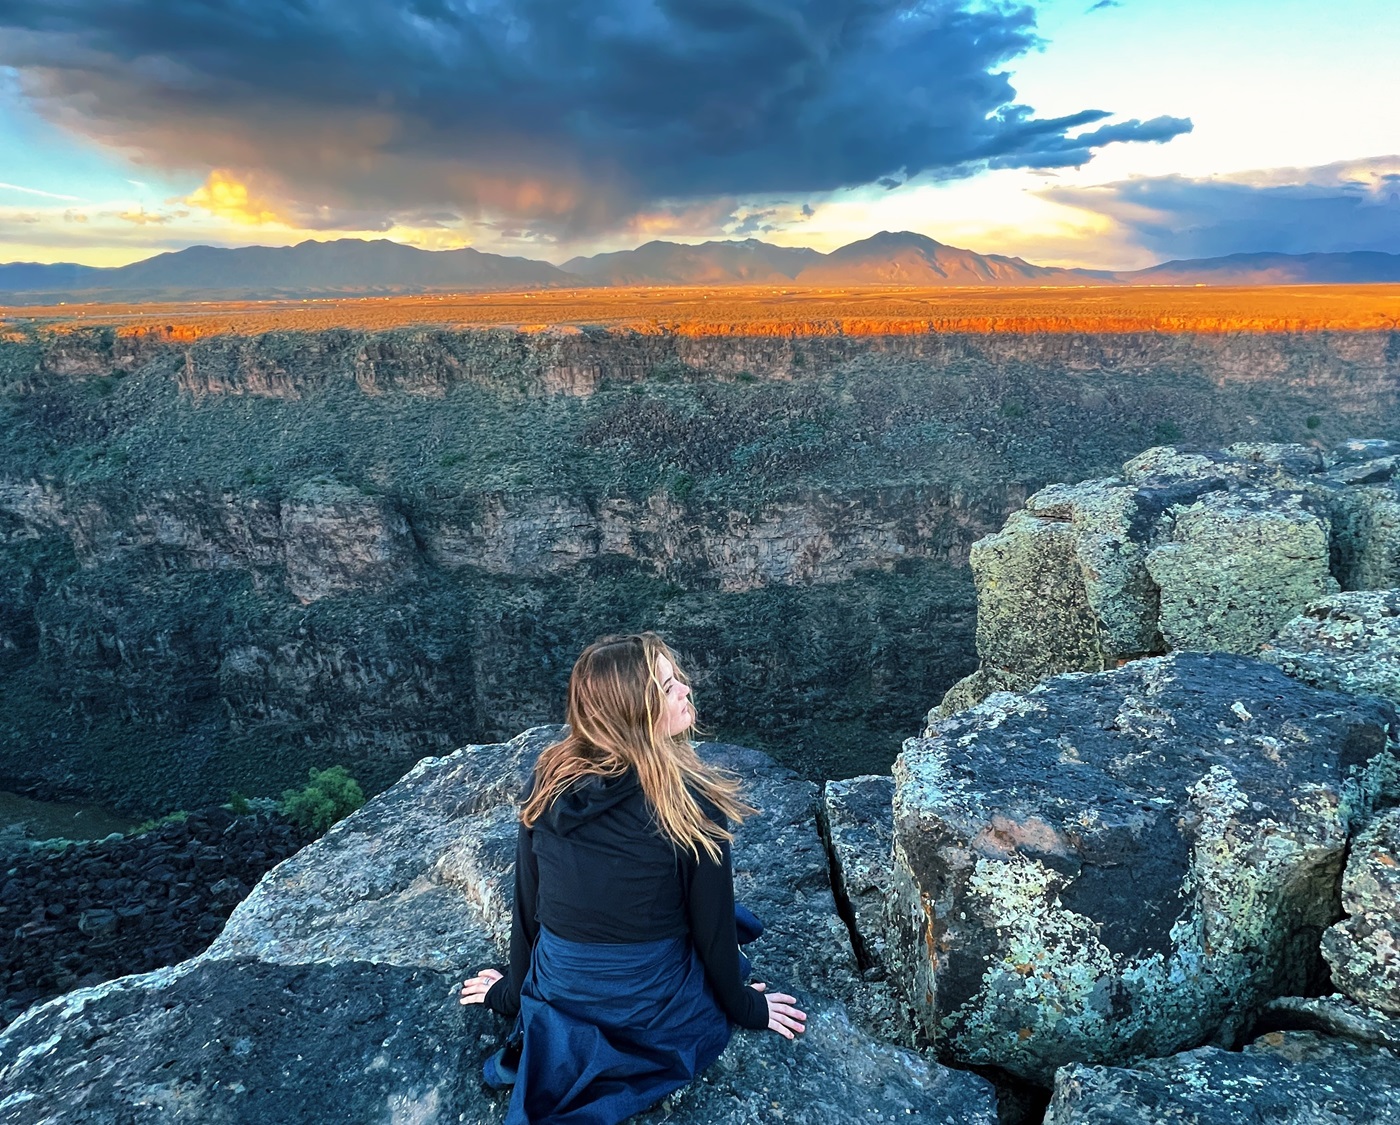 Student sitting over looking the Rio Grande Gorge with mountains and the sunset in the background